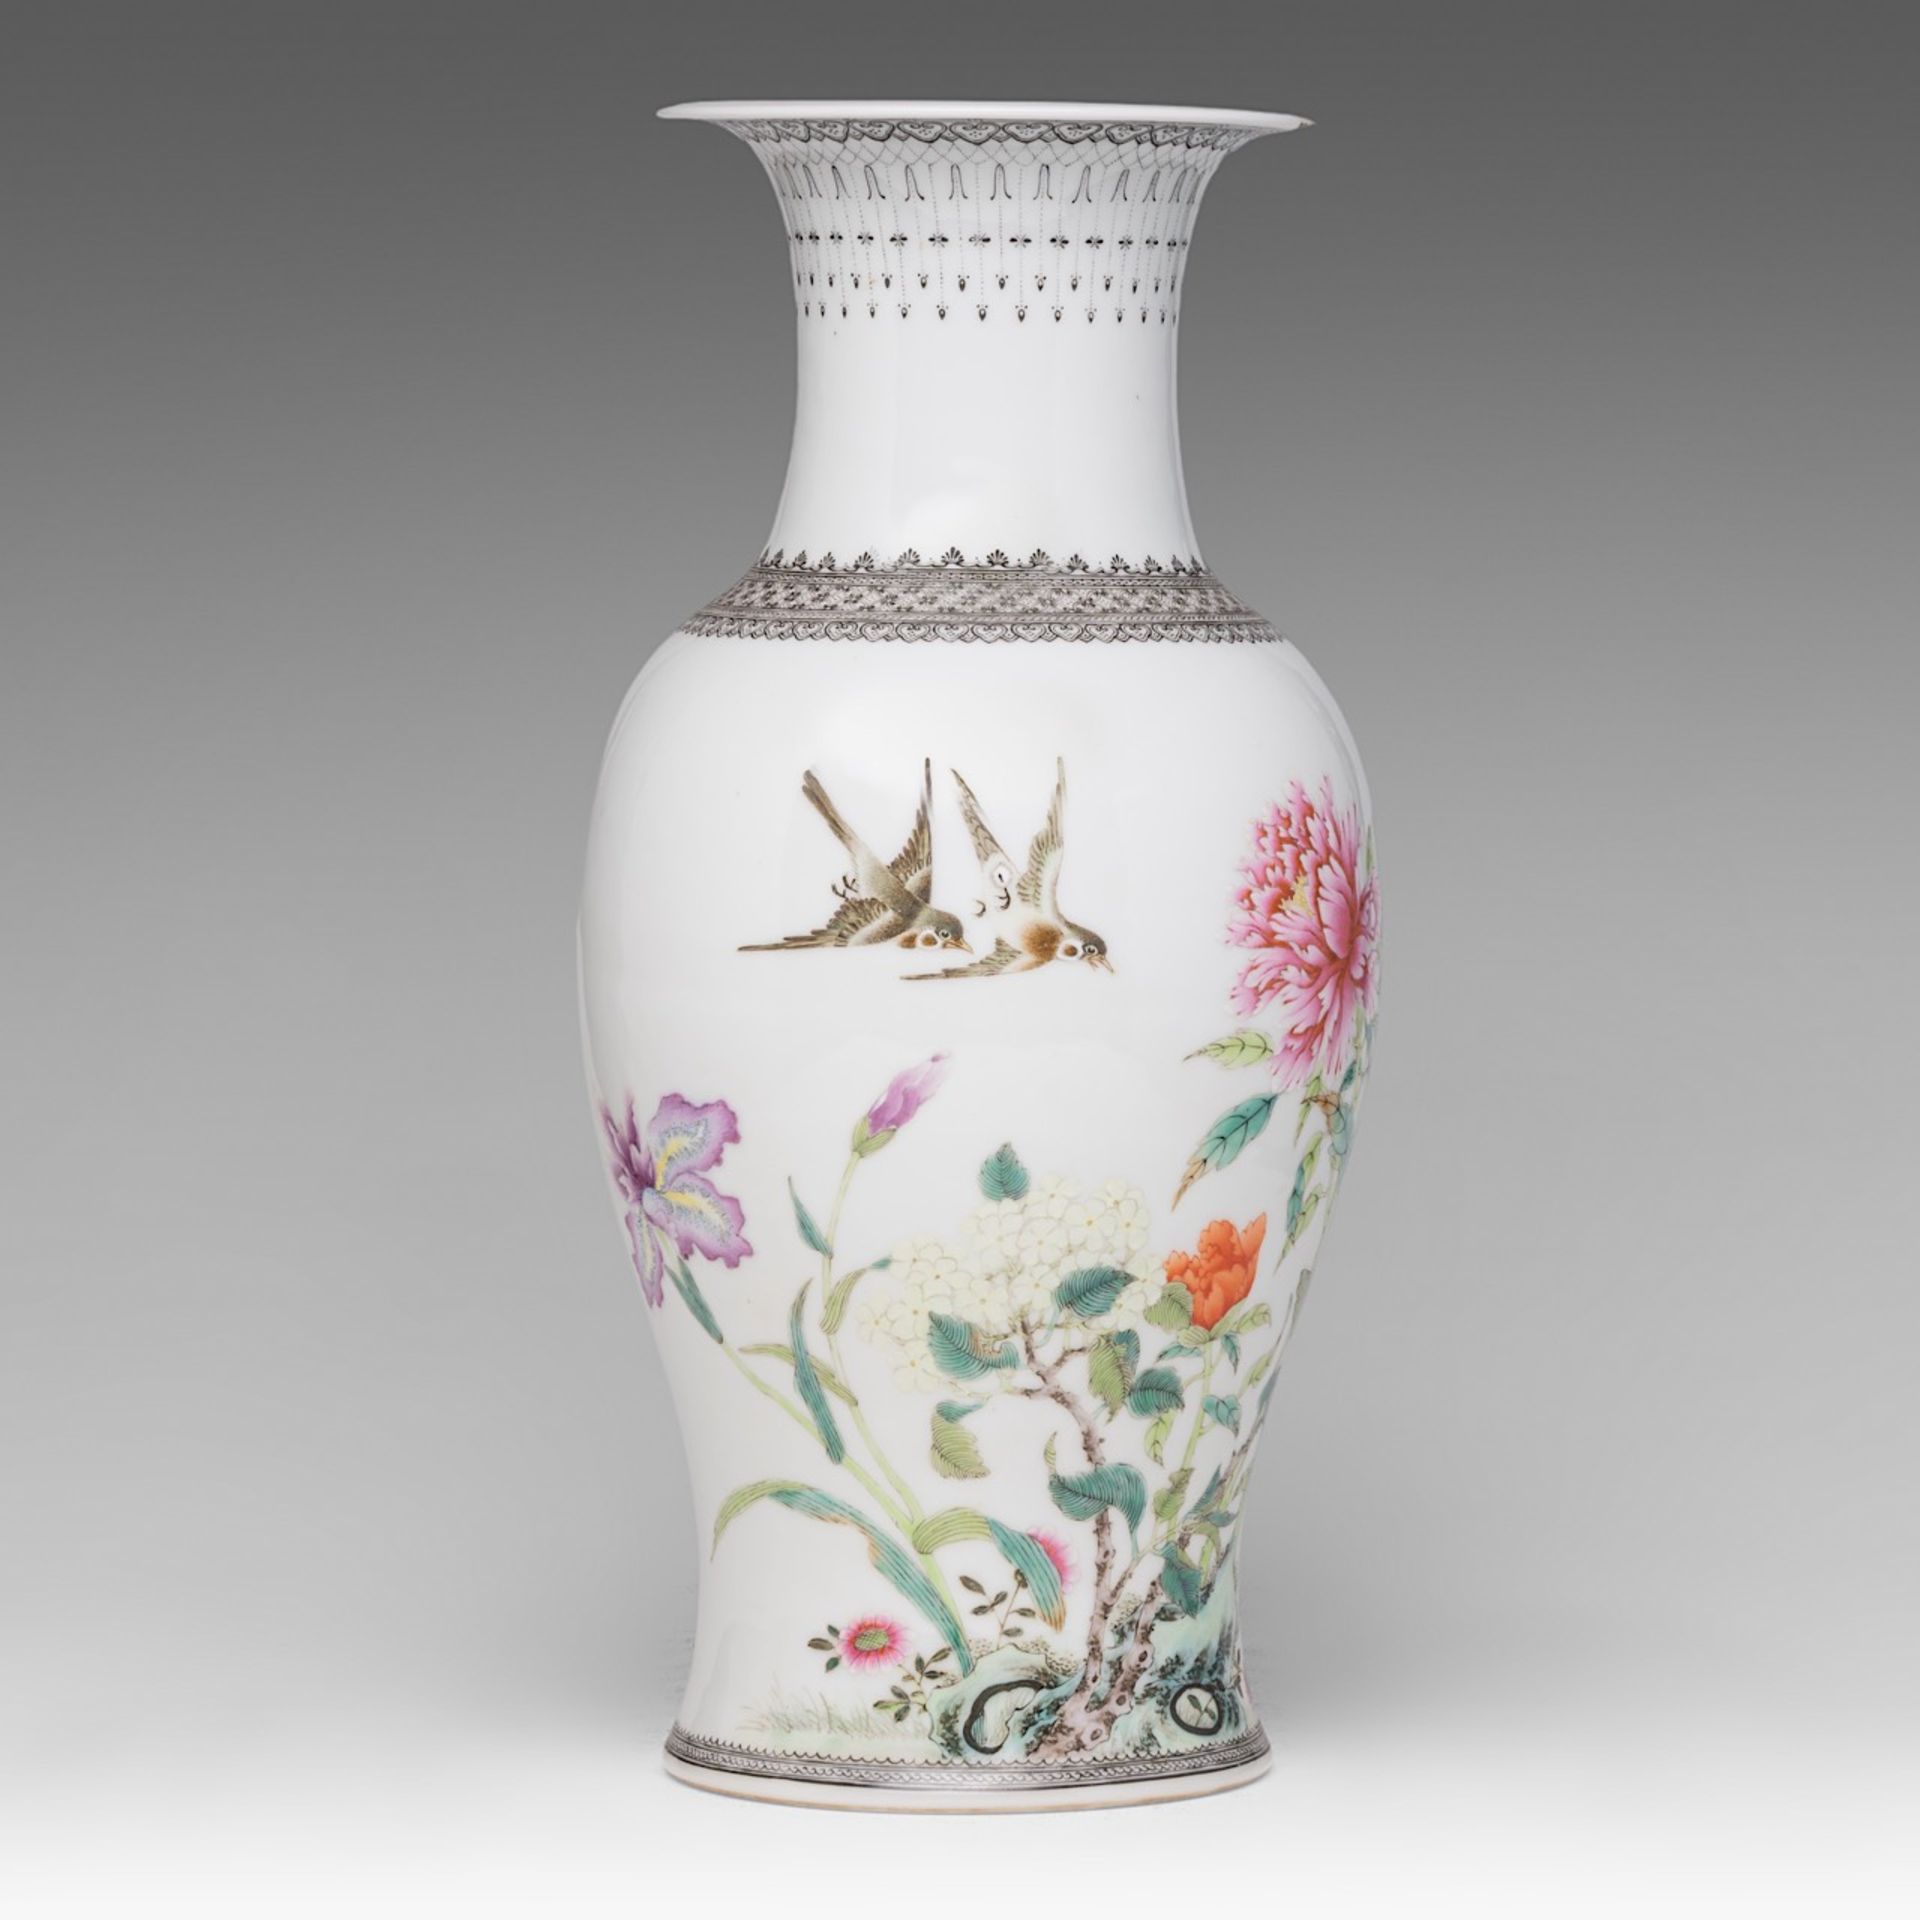 A Chinese famille rose 'Magpies in a Lotus Garden' vase, the back with a signed text, 20thC, H 41,3